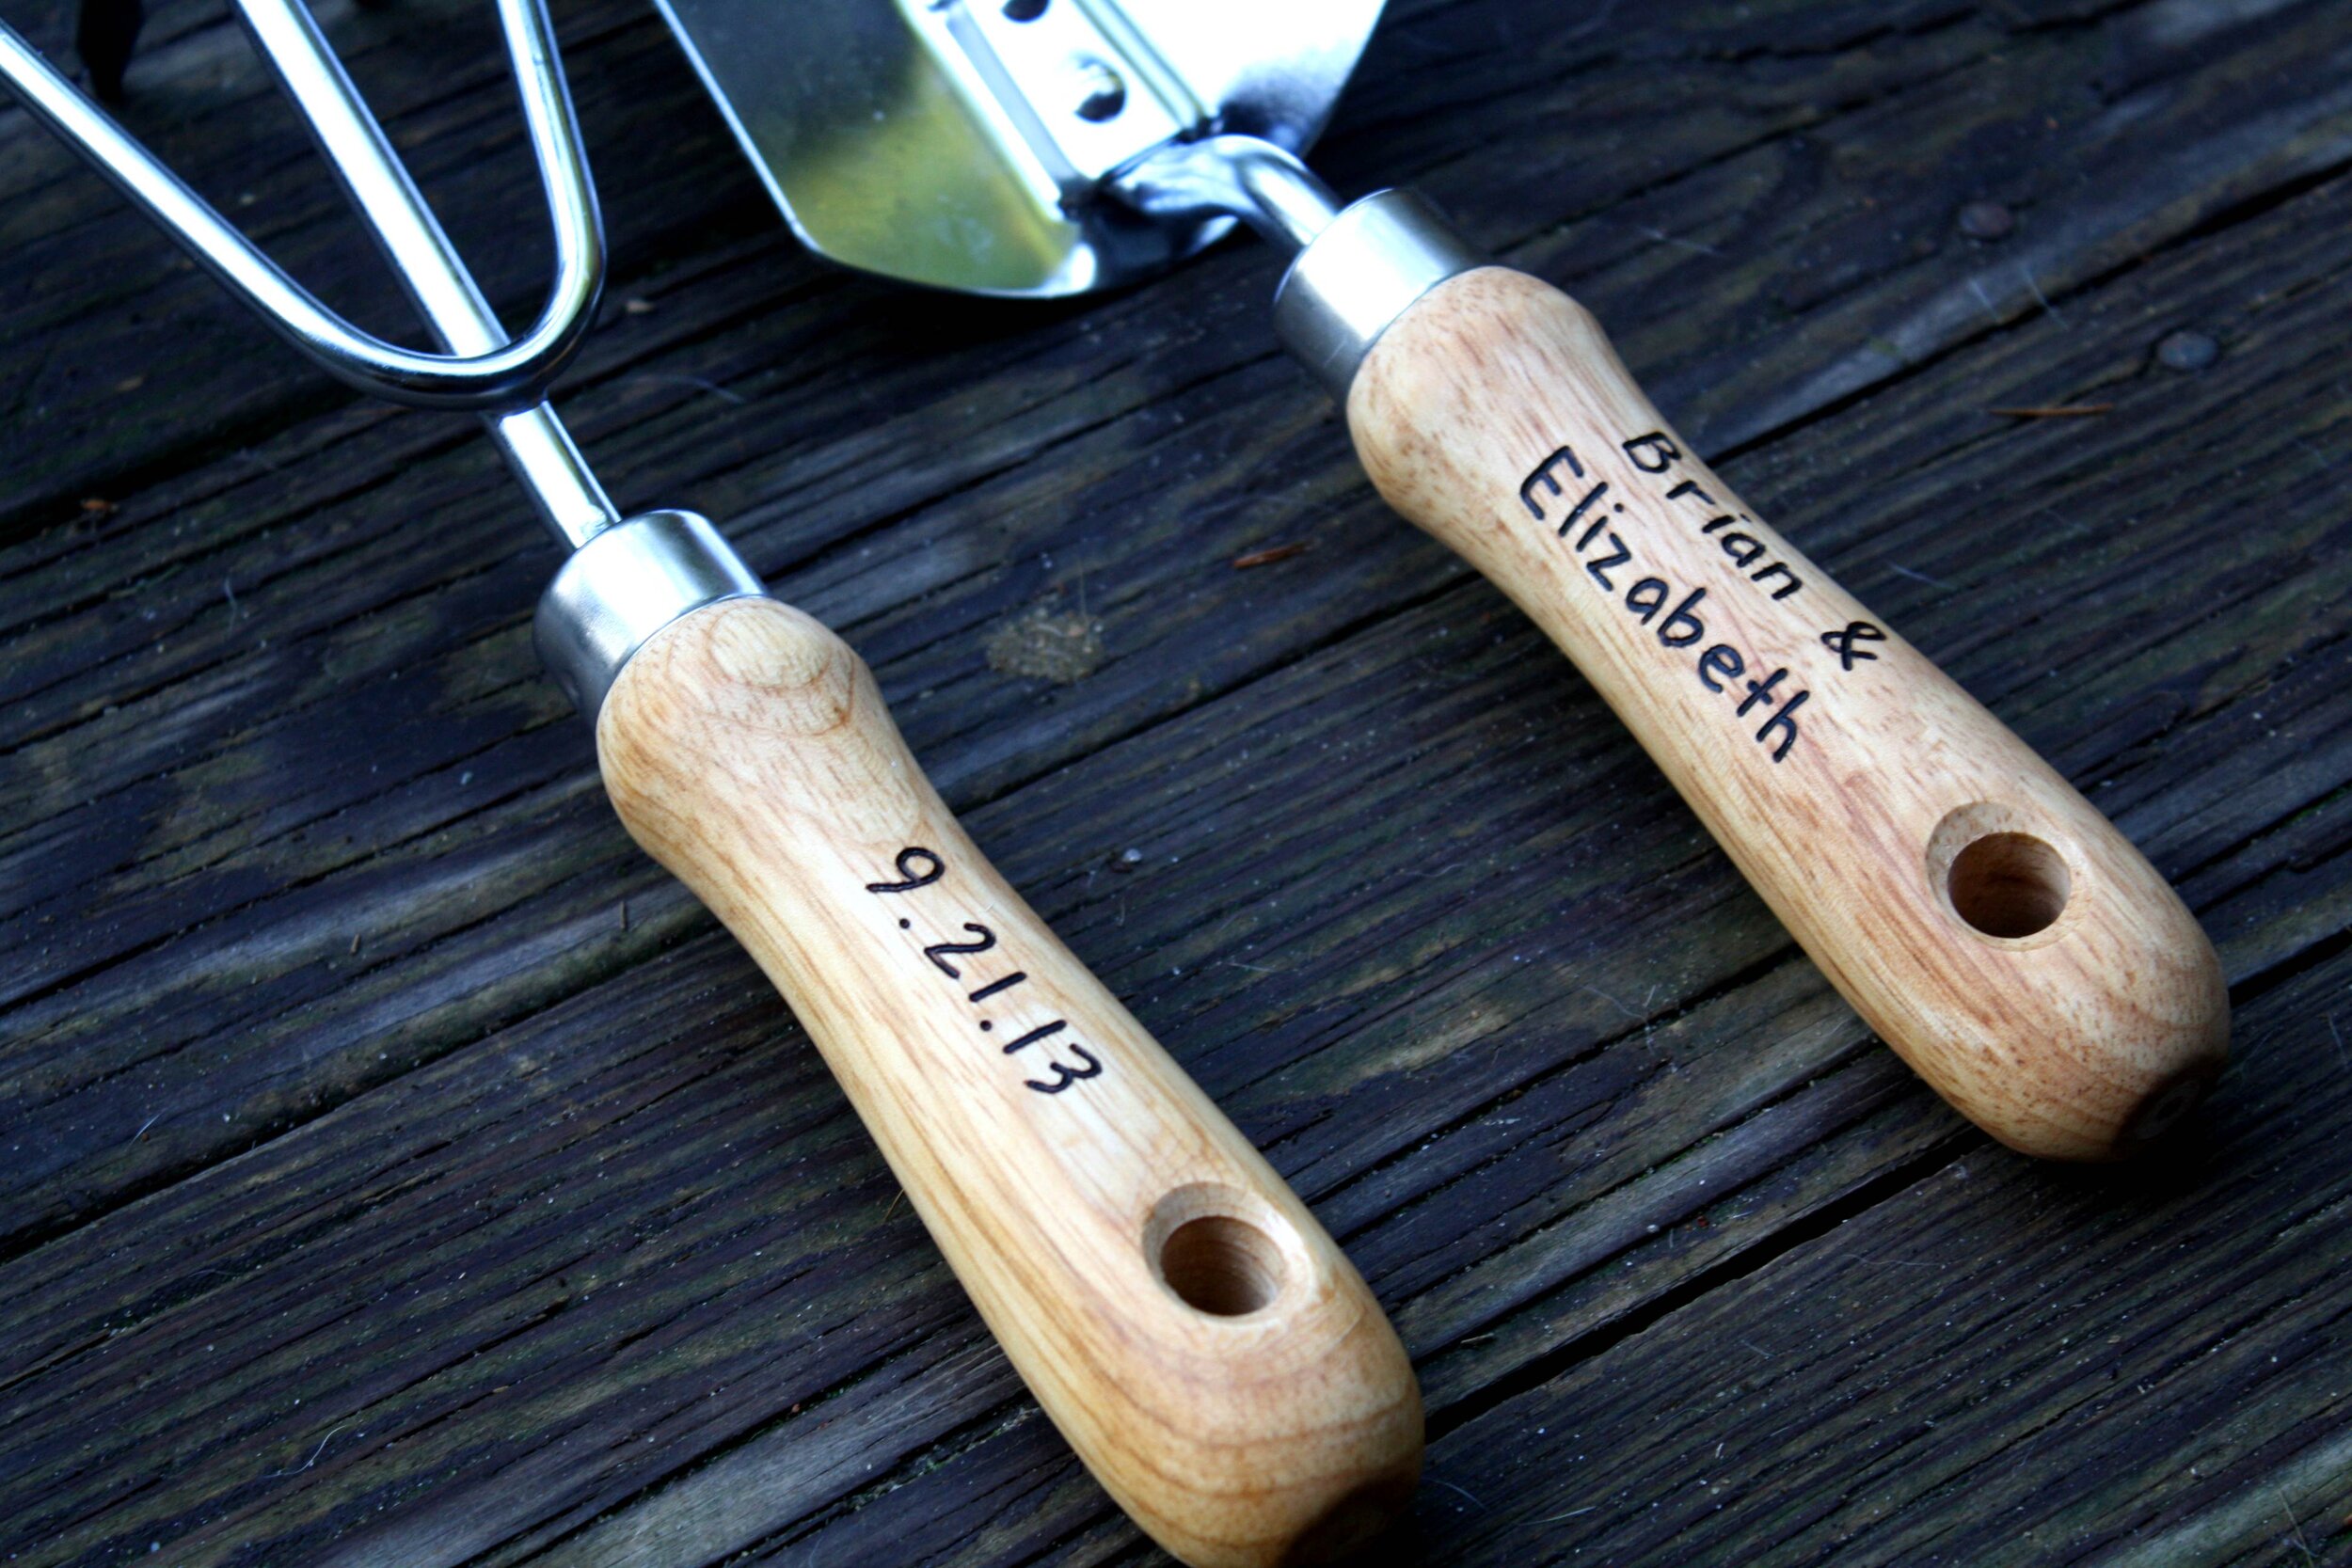 Personalized Garden Tool Set